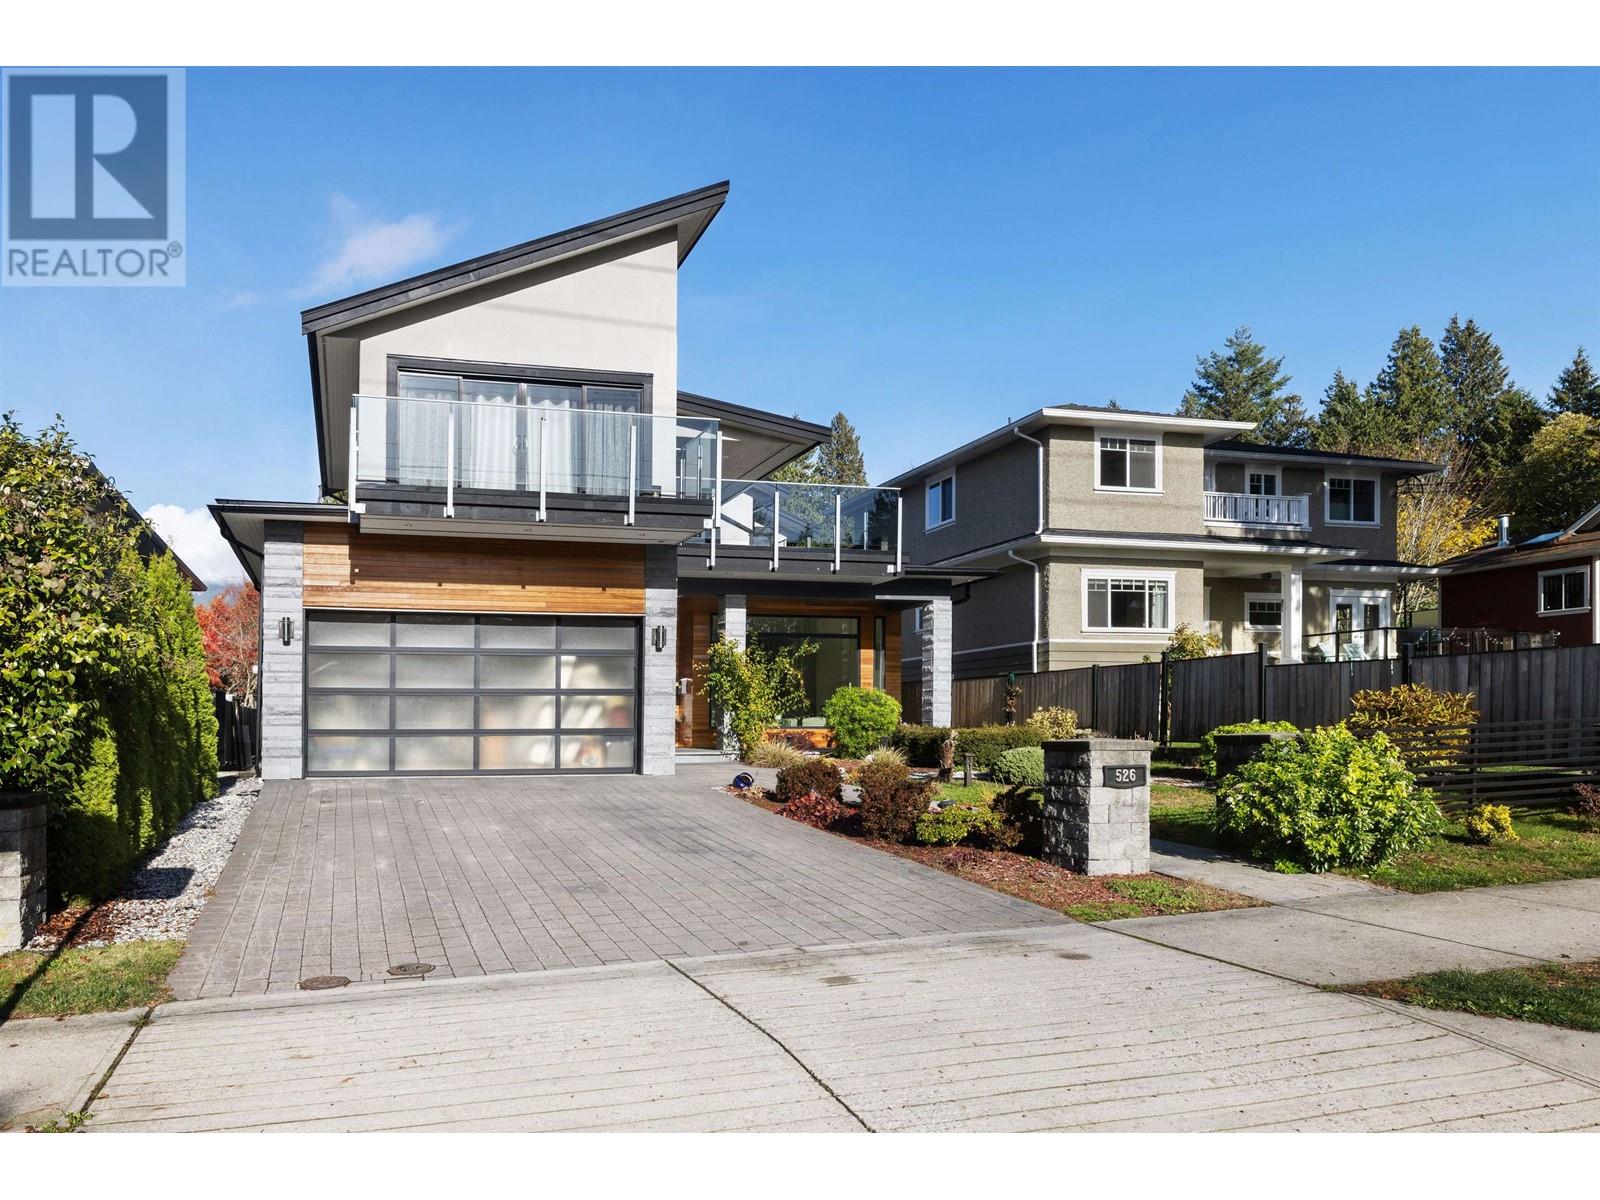 526 W 21ST STREET, North Vancouver